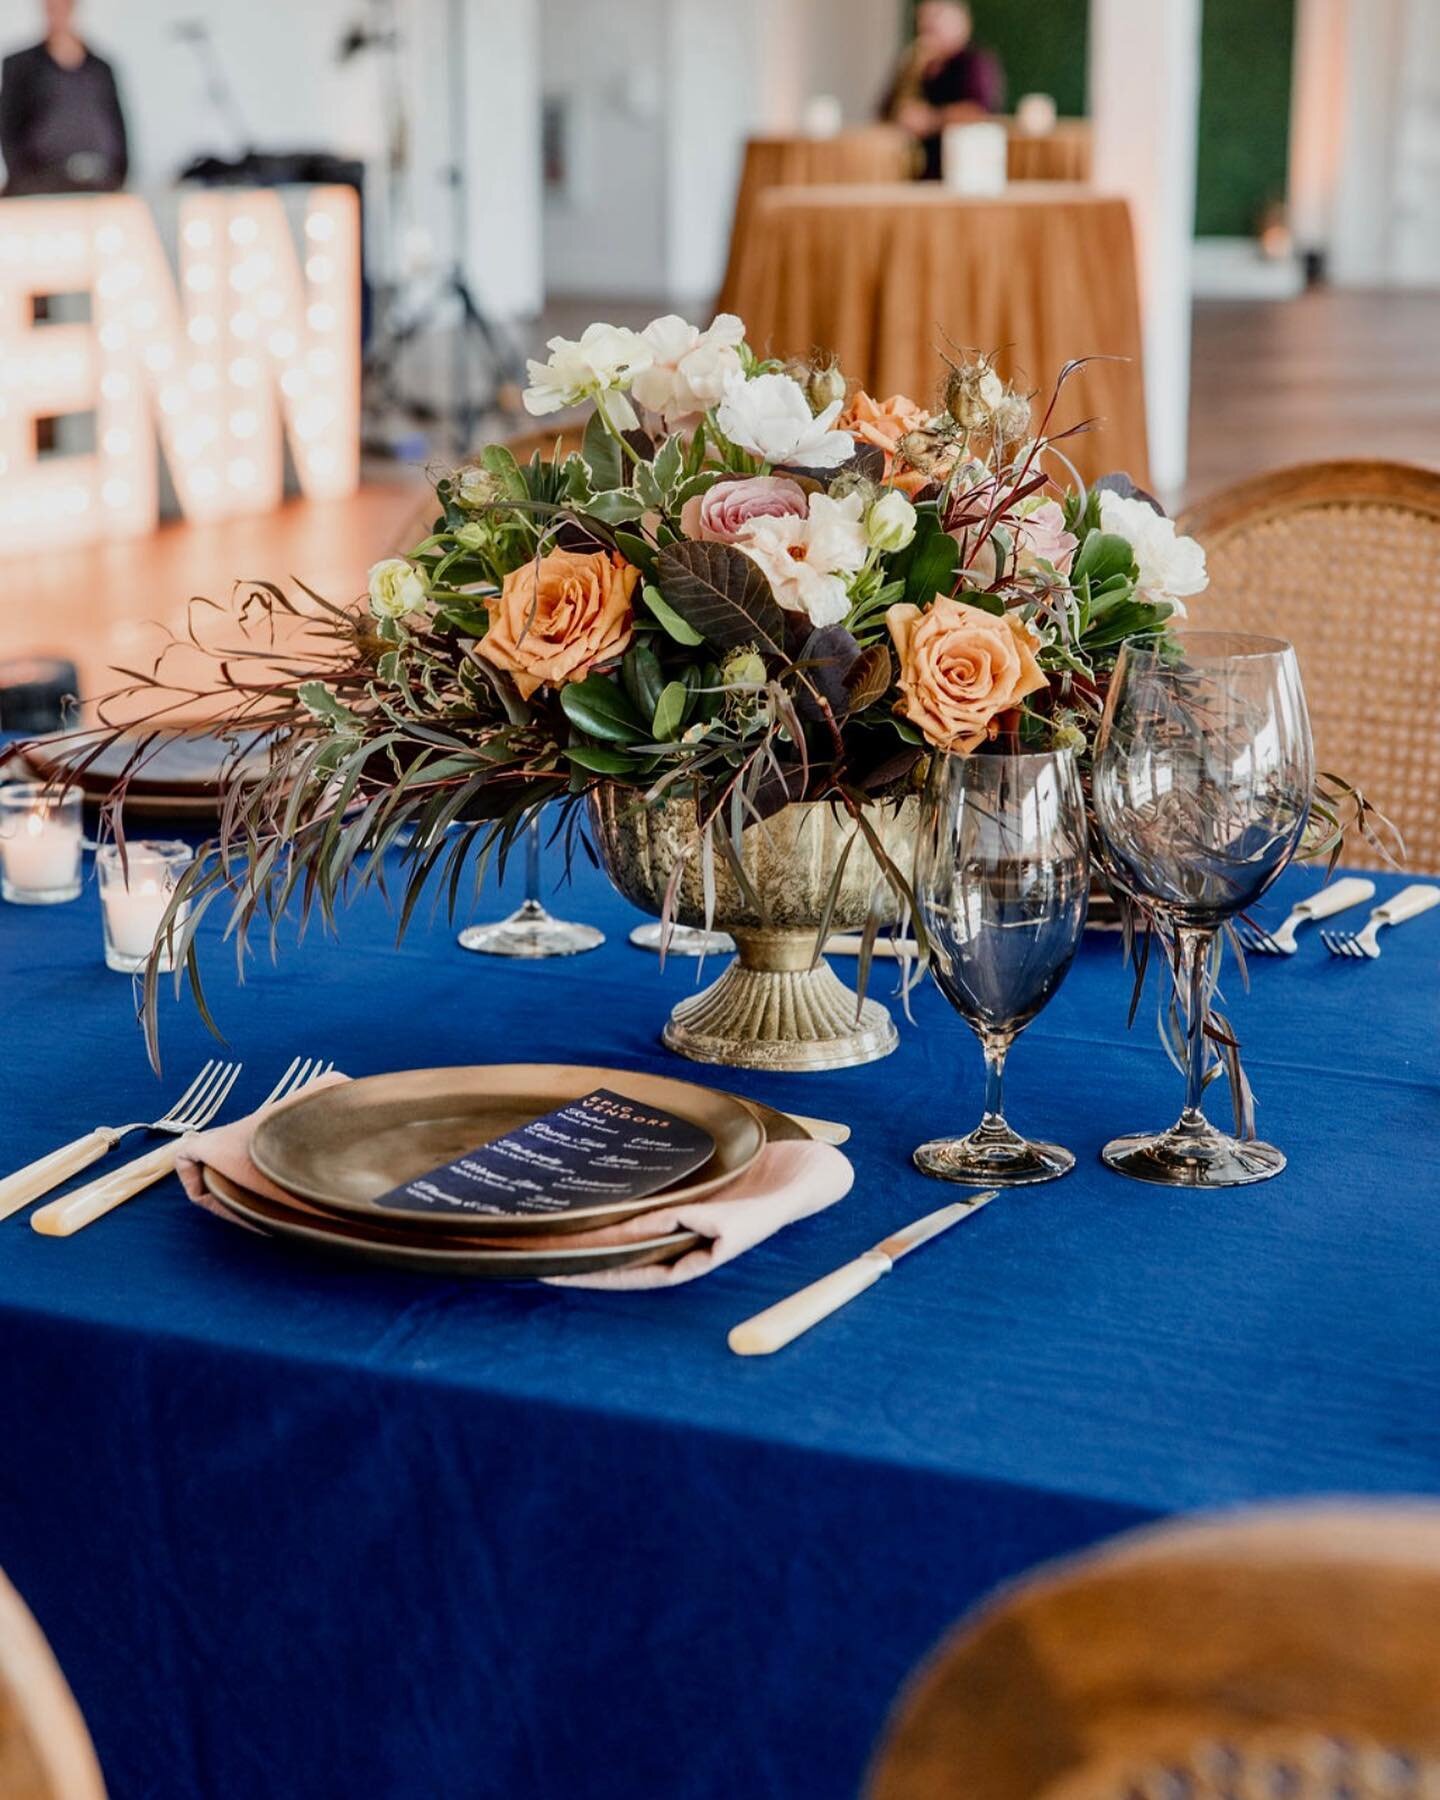 Another open house in the books! This one featured a more corporate-styled moody design 💫 

Venue: @14tenn.828 
Photo: @johnmyersphotography 
Florist: @lma__designs 
Rentals: @pleasebeseatedrentals 
Catering: @mortonssteak 
Marquee Letters: @alphali